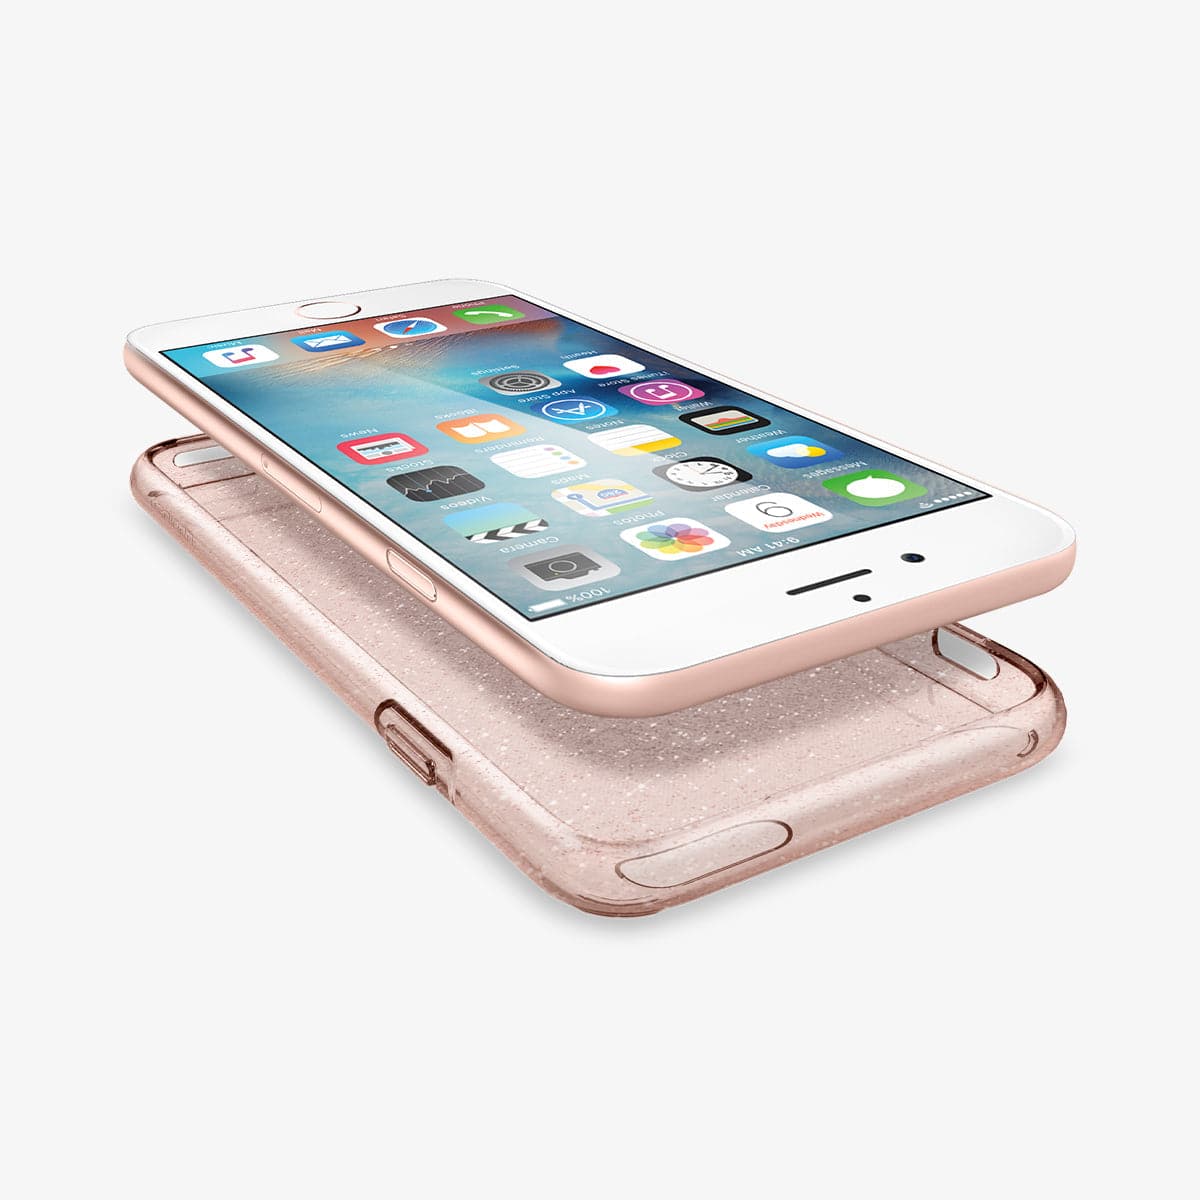 035CS21416 - iPhone 6 Series Liquid Crystal Glitter Case in rose quartz showing the front and side with device hovering above the case